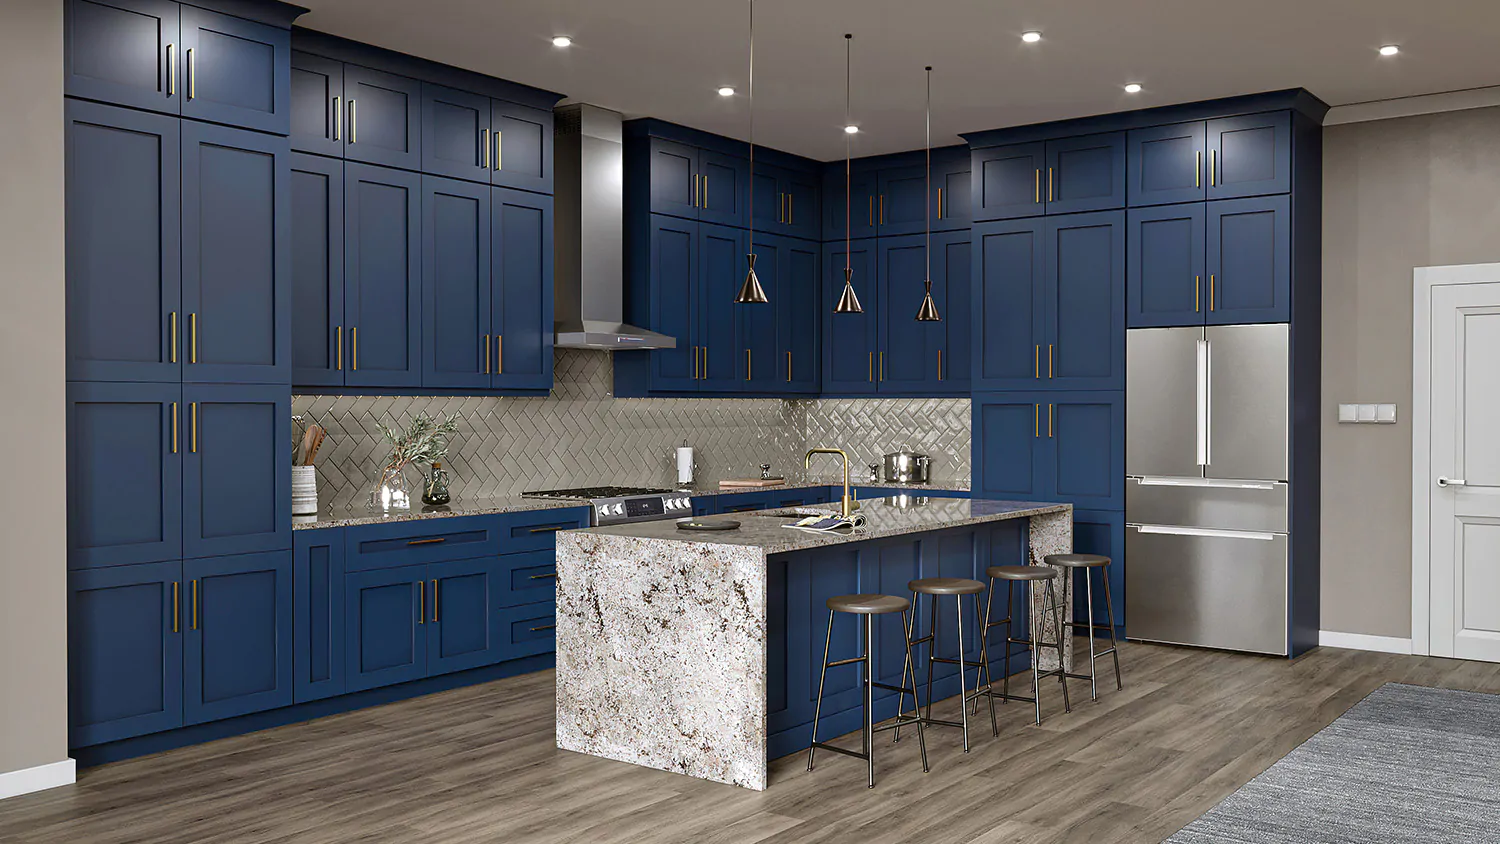 Secrets to Find Cheap and Best Kitchen Cabinet Sets Online at Nuform  Cabinetry by Nuform Cabinetry - Wholesale Cabinet Store in Pompano Beach,  FL - Alignable